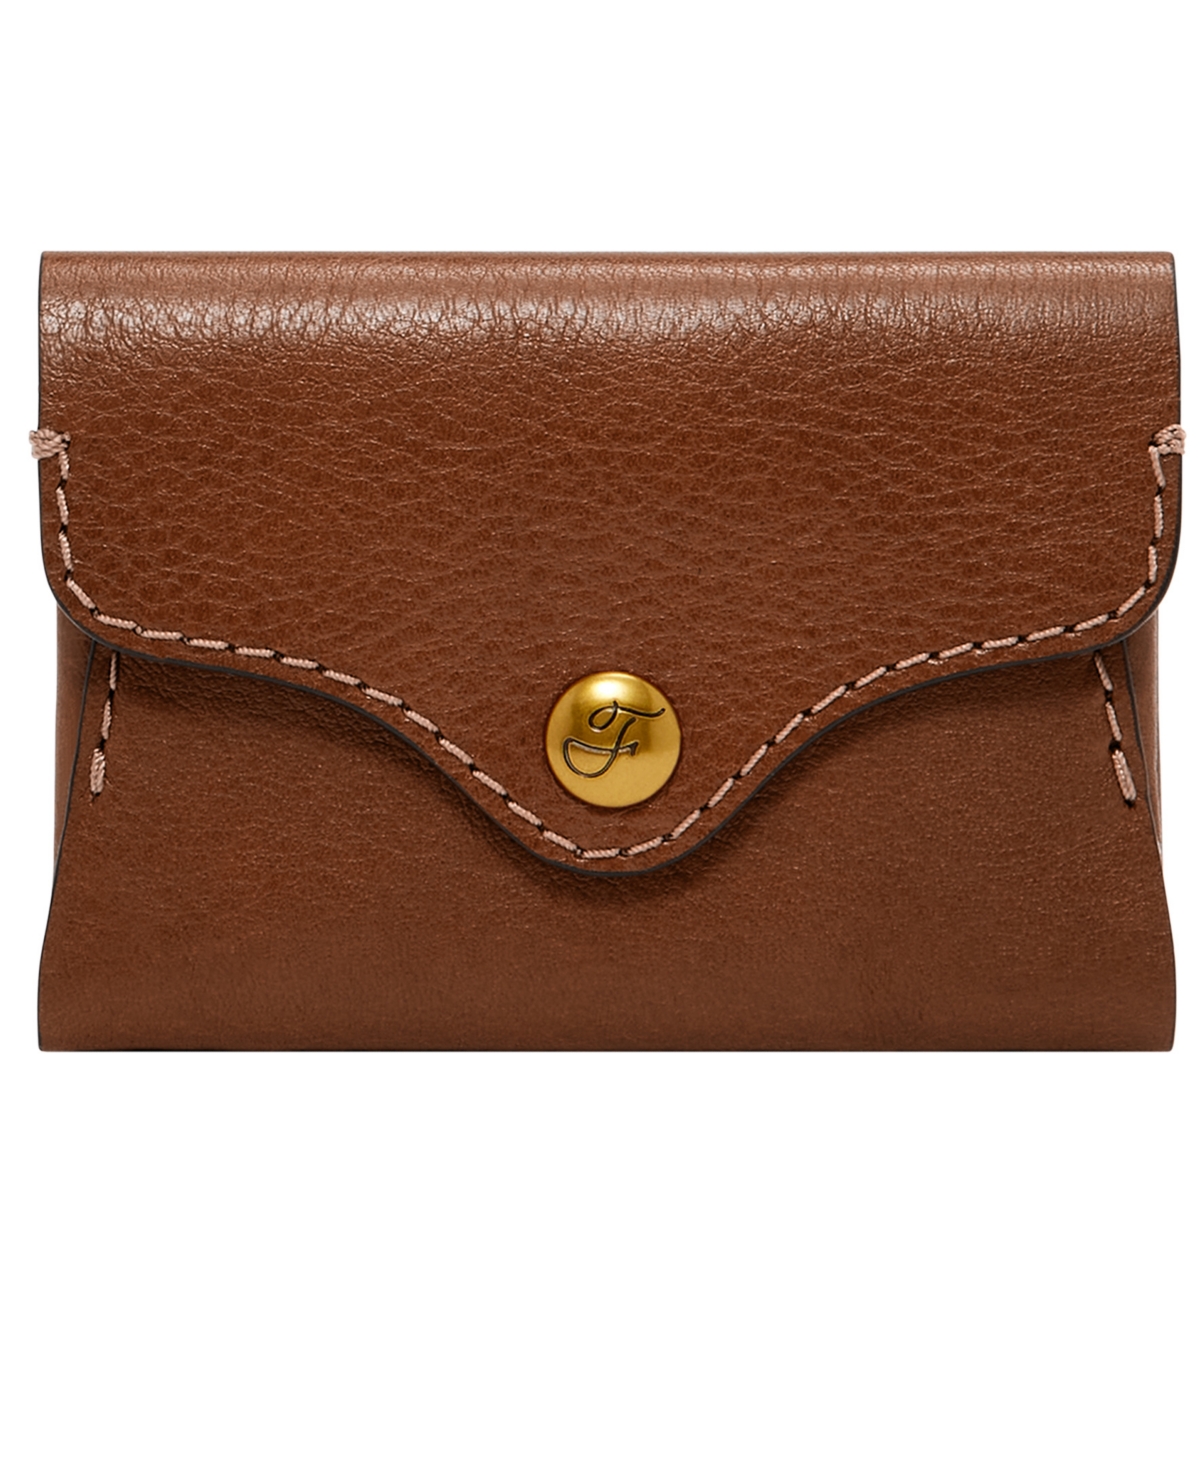 FOSSIL HERITAGE LEATHER CARD CASE WALLET